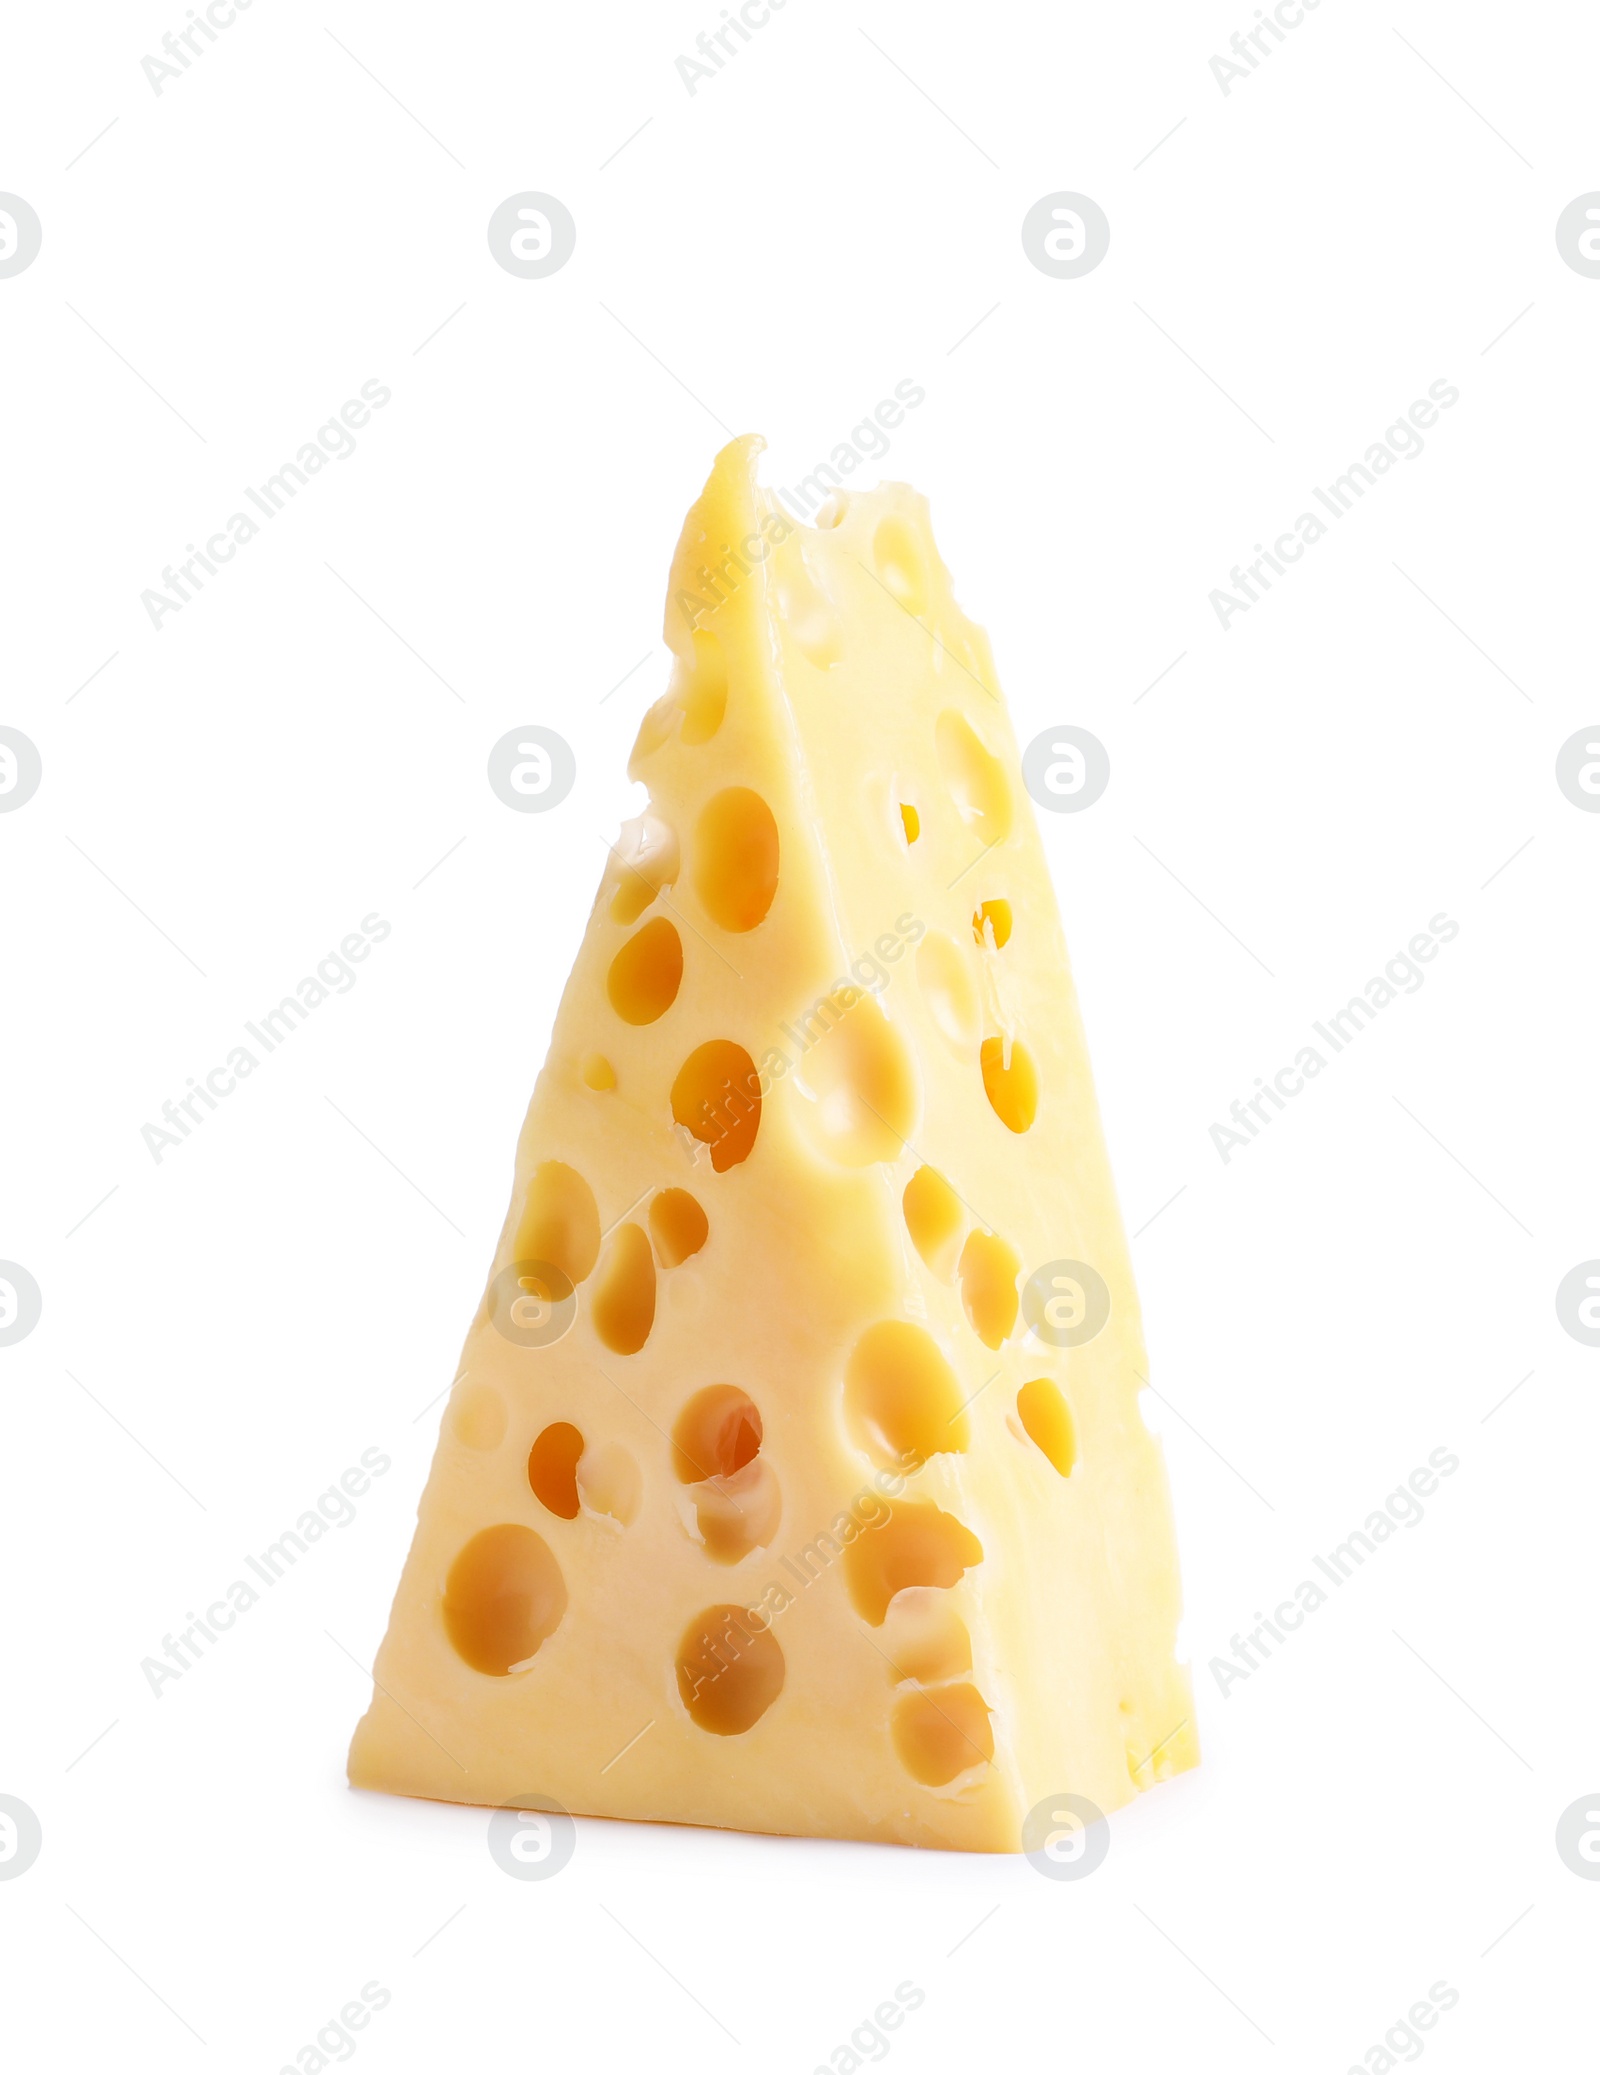 Photo of Piece of cheese with holes isolated on white